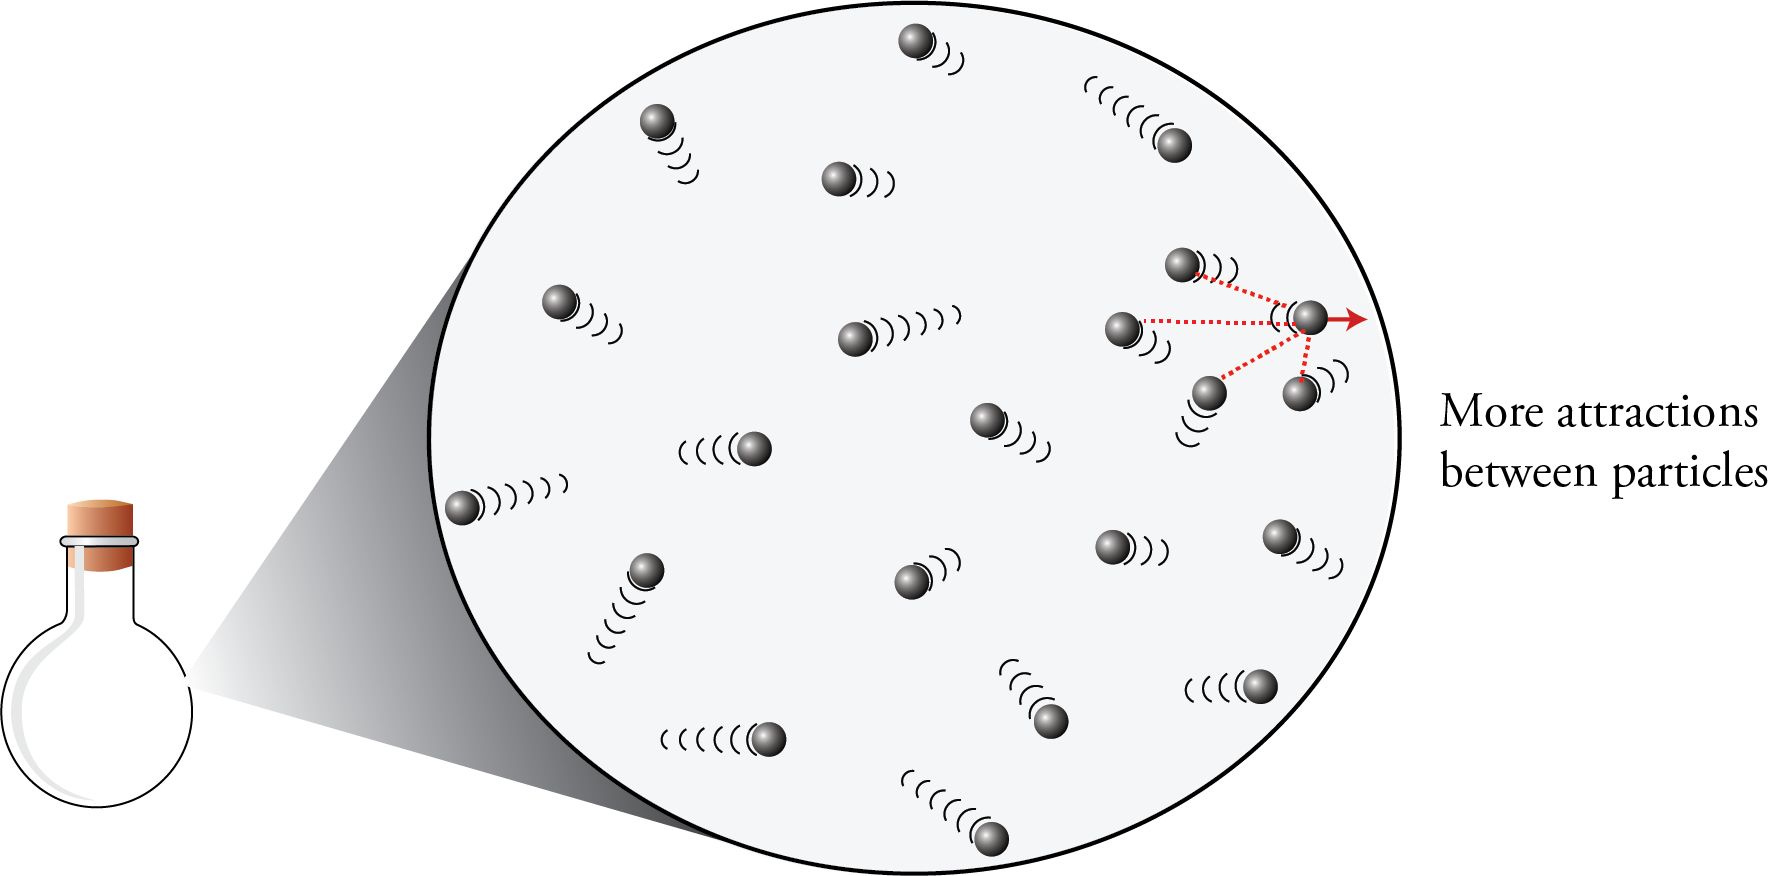 Image showing the particle nature of gases. The image shows that for real gases, increased concentration of gas leads to more attractions pulling the particles back from the walls, resulting in a greater decrease in the force of the collisions with the walls.